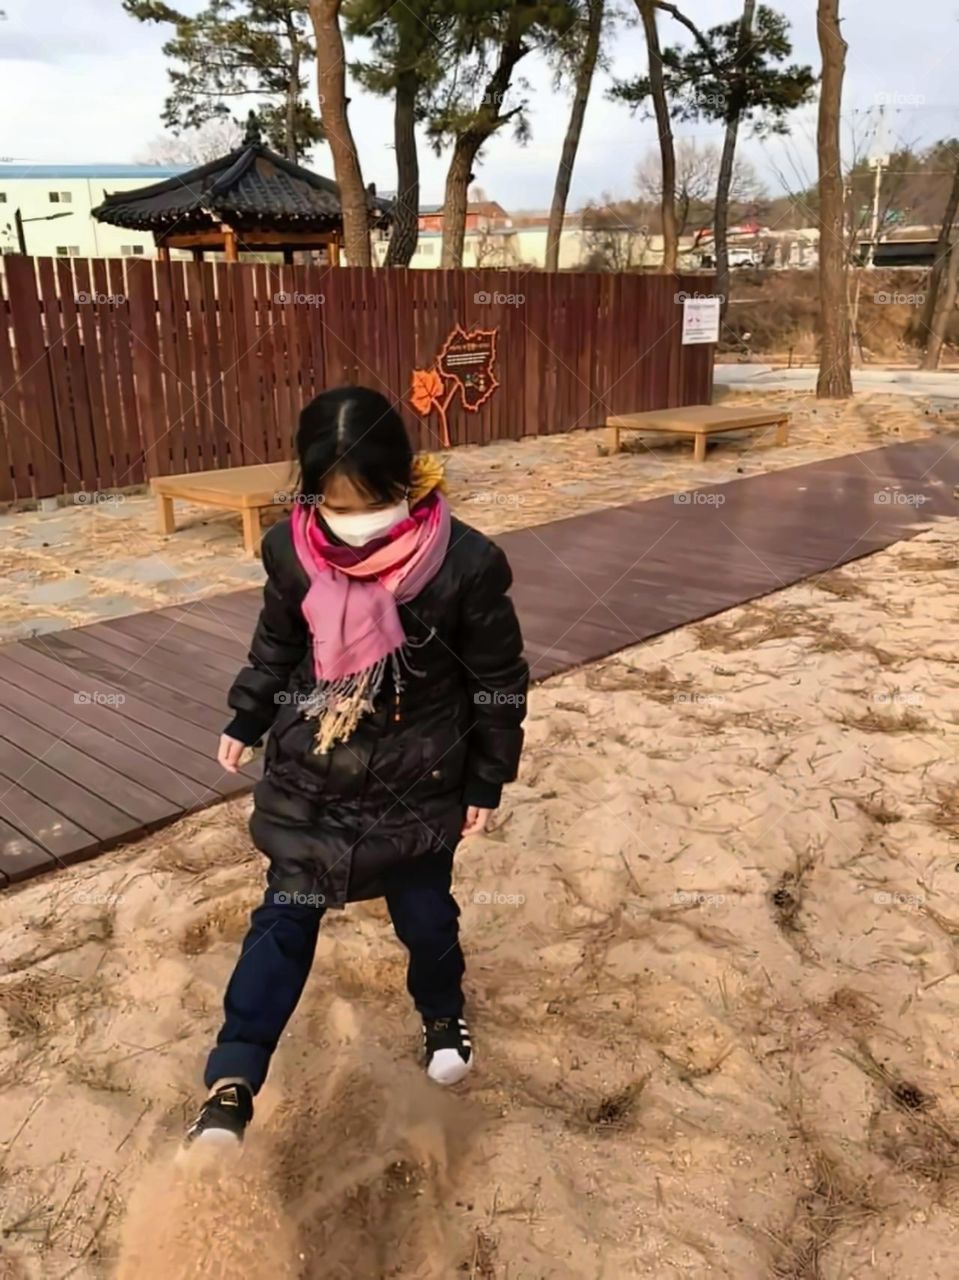 kicking the sand , makes her more  happy.